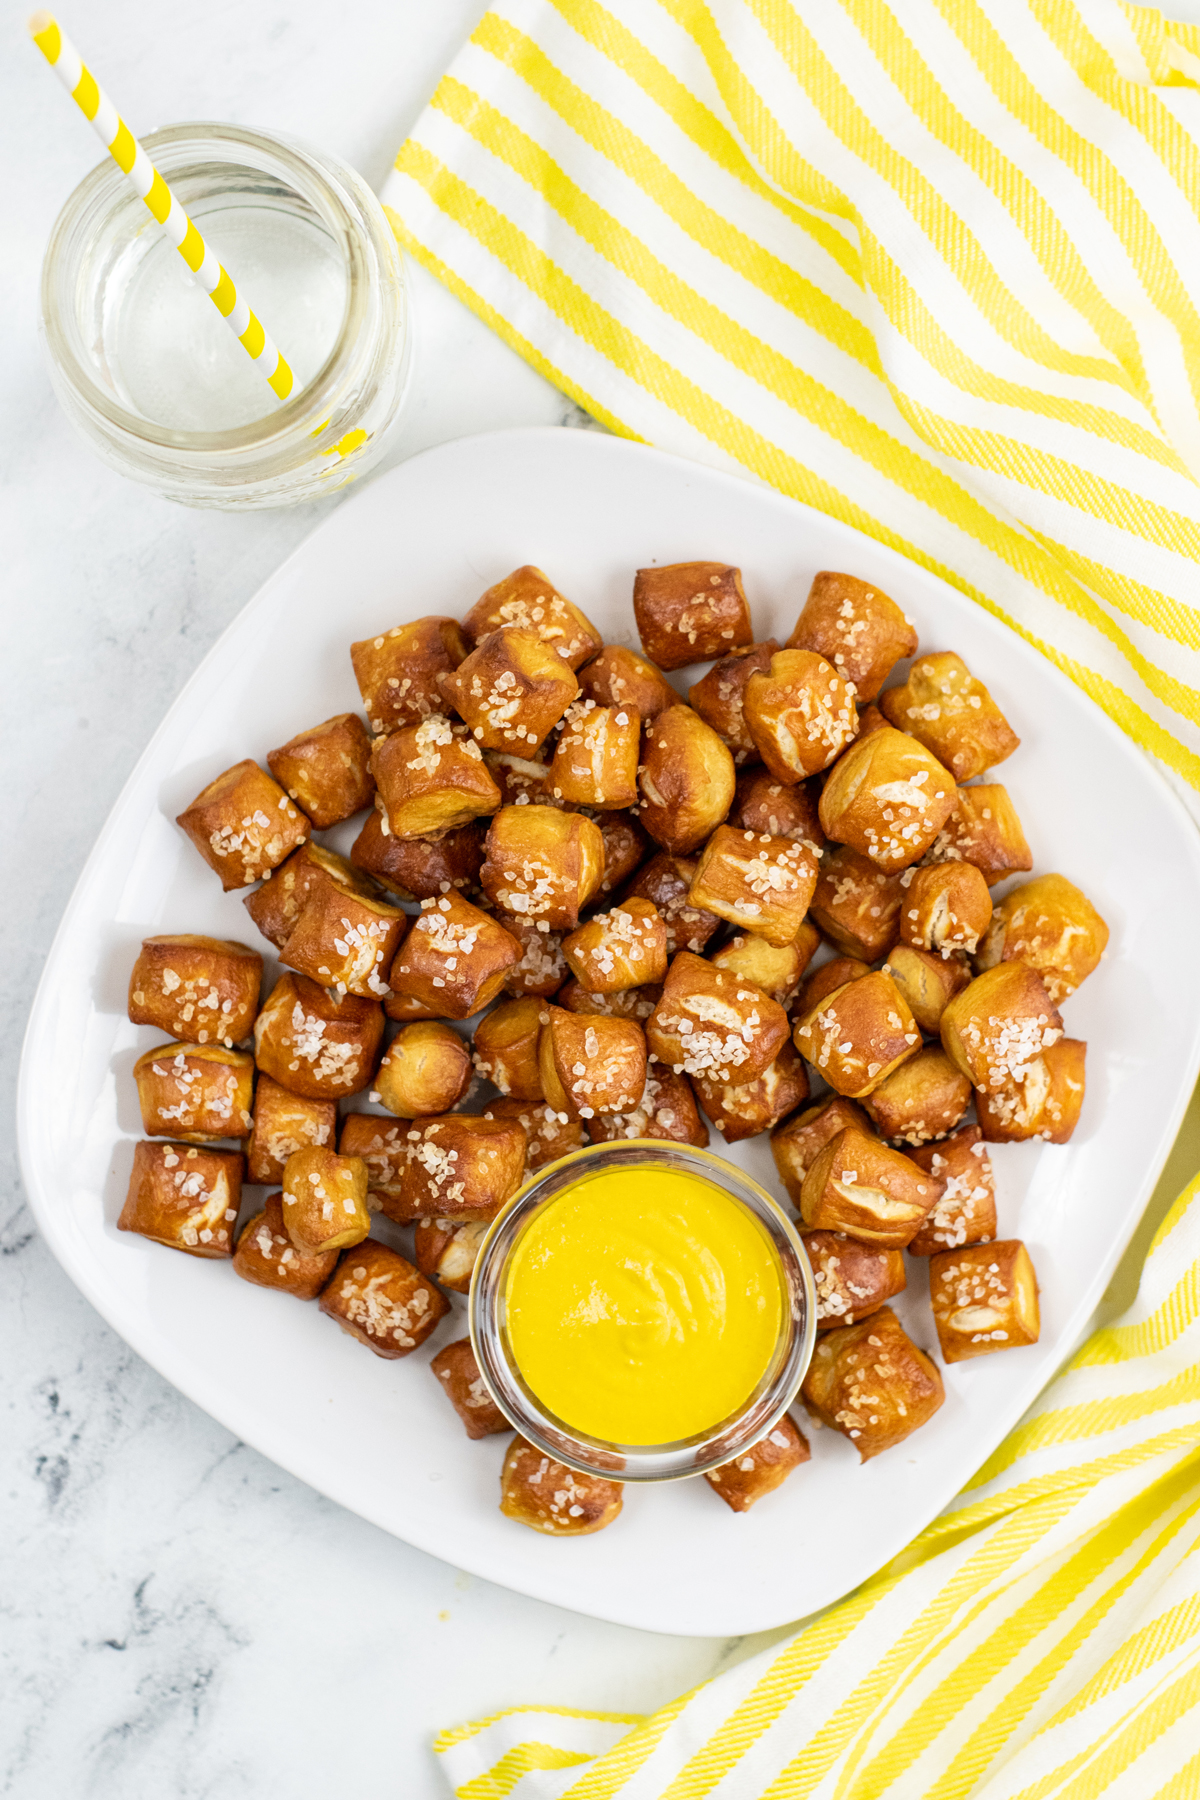 pretzel bites on white plate with a side of mustard sauce